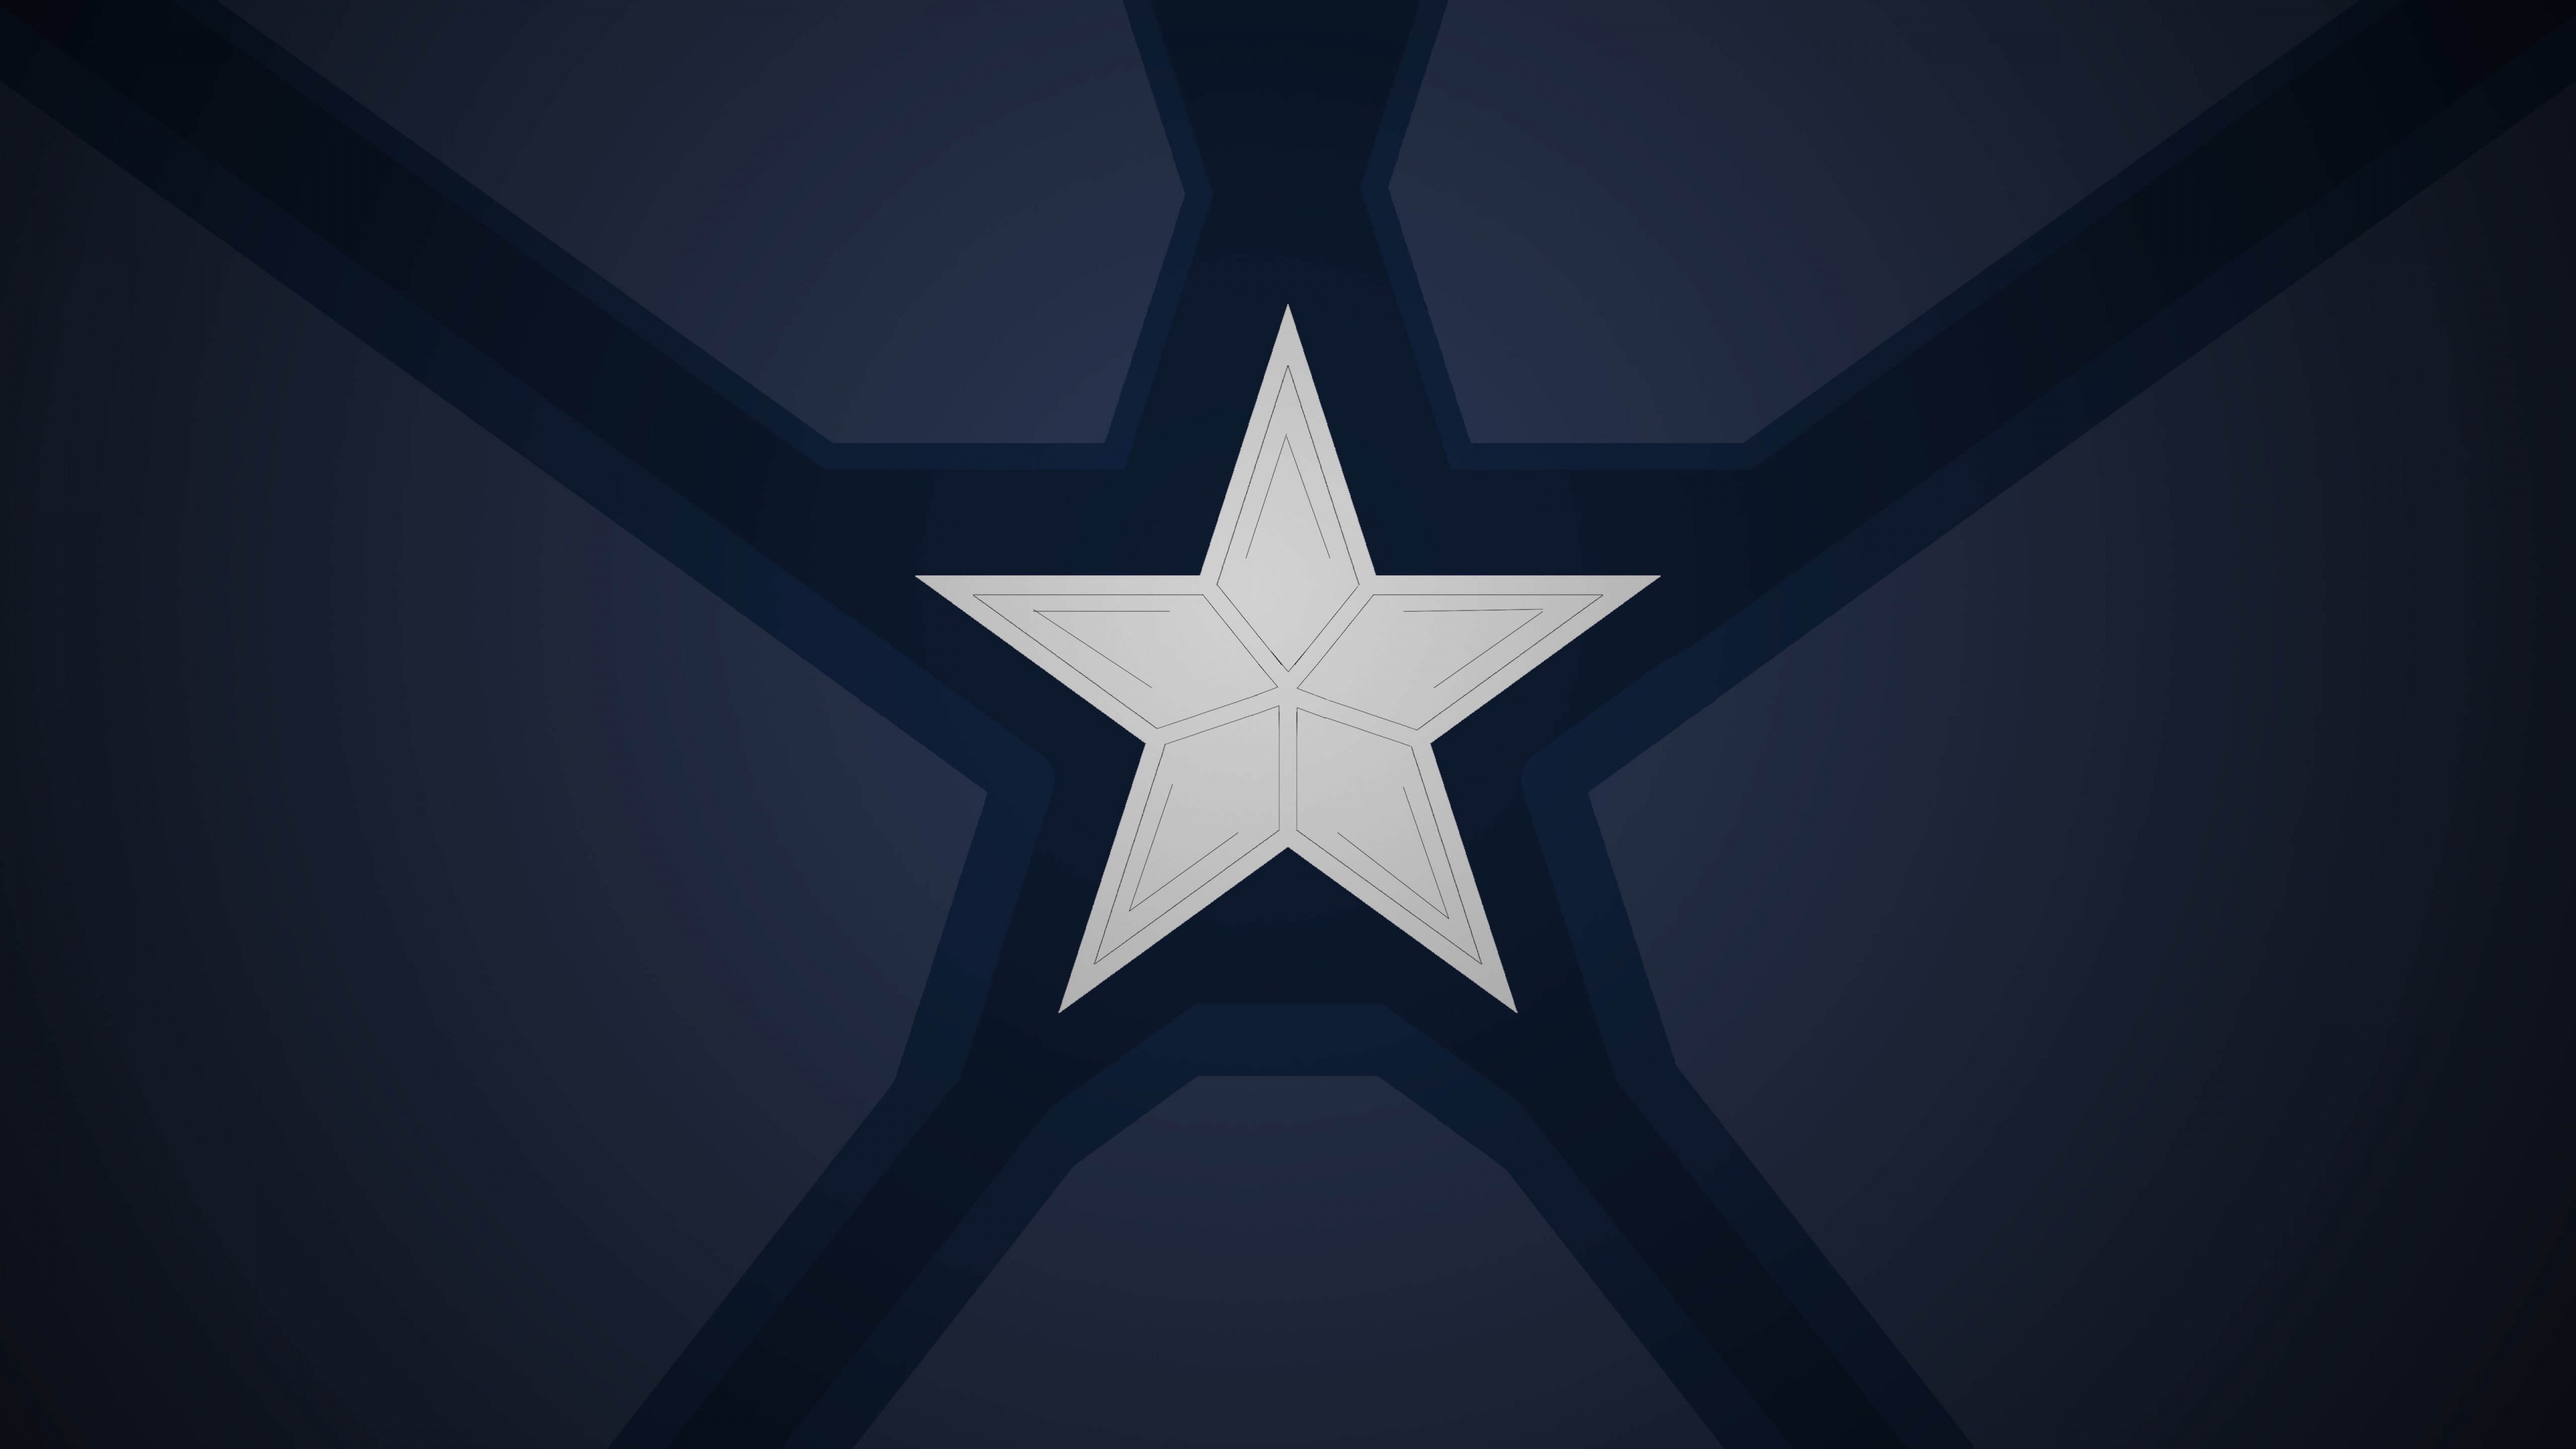 emblem captain america wide free awesome image for mobile